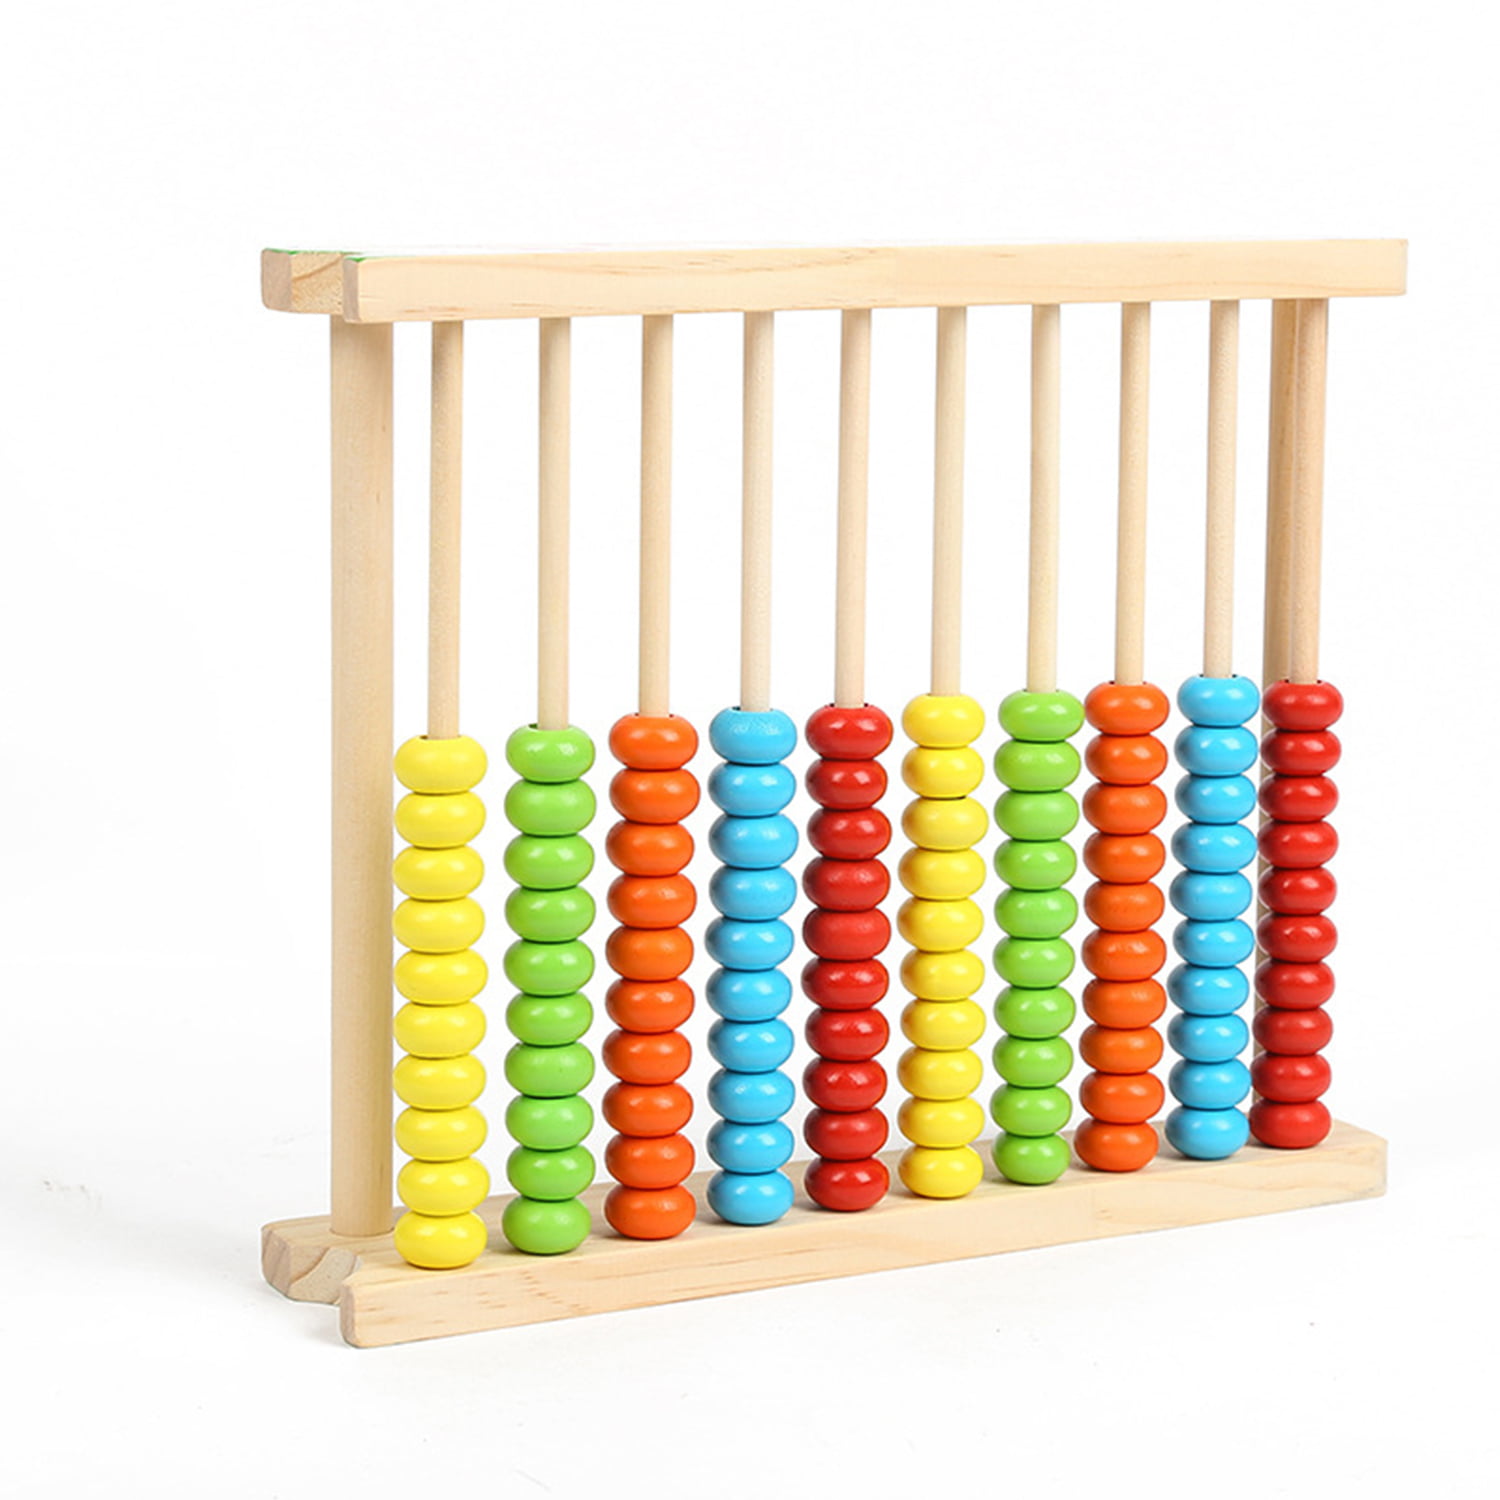 Eliiti Wooden Counting Abacus Toy with Beeds for Toddlers Kids 3 to 5 Year Old 